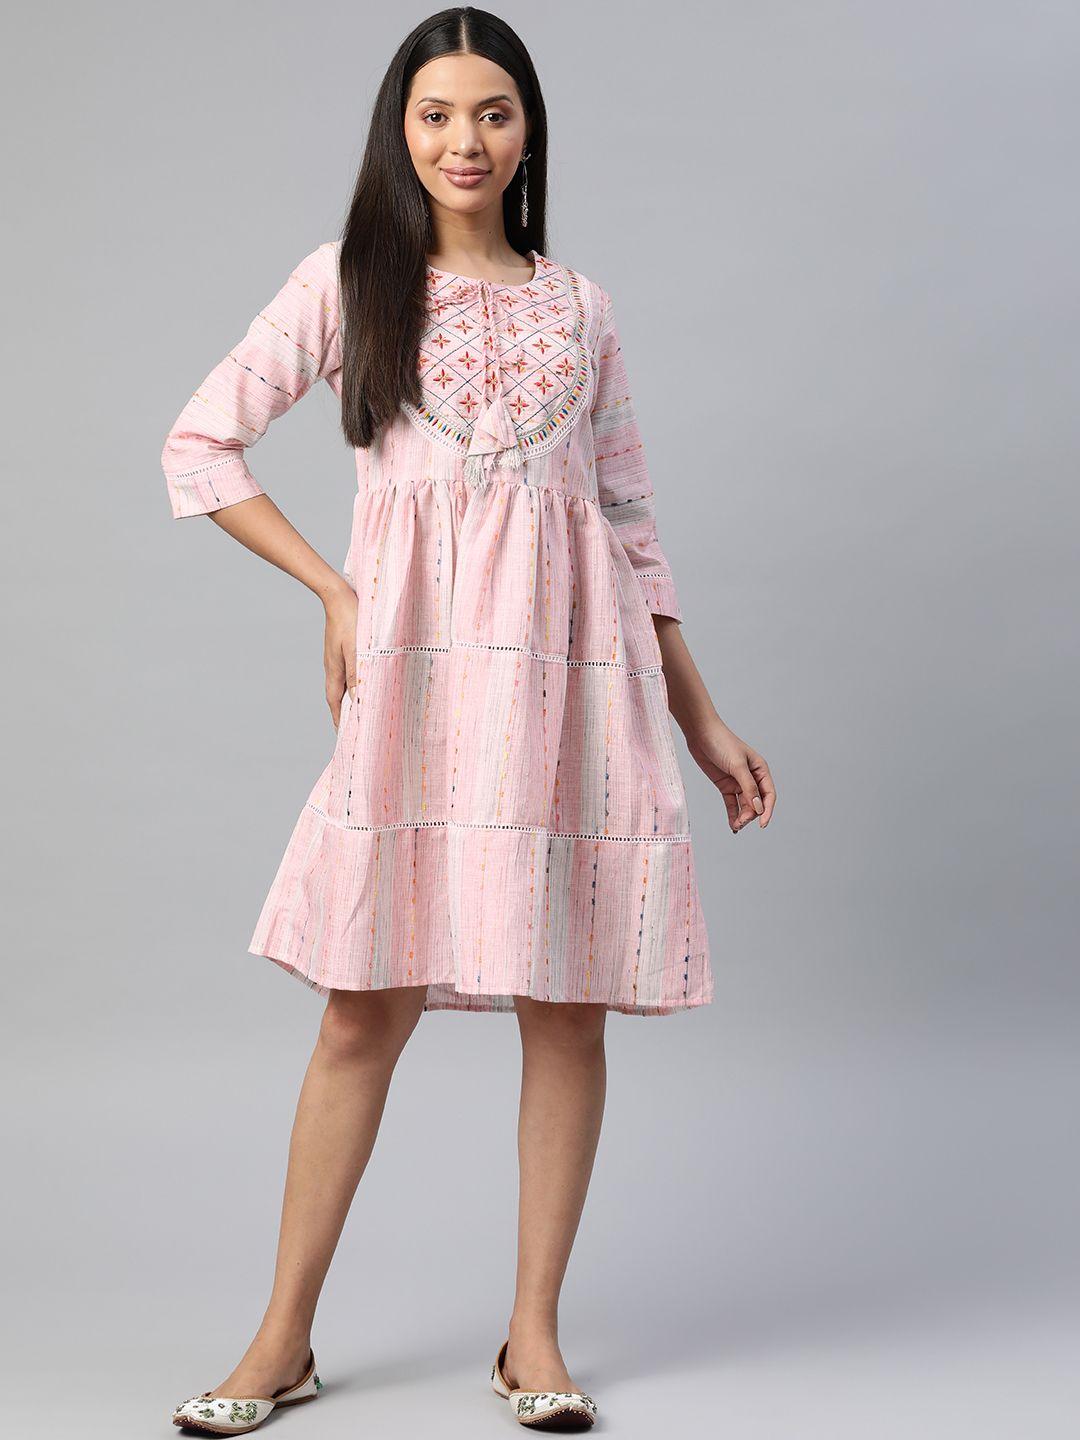 readiprint fashions floral embroidered fit & flare dress